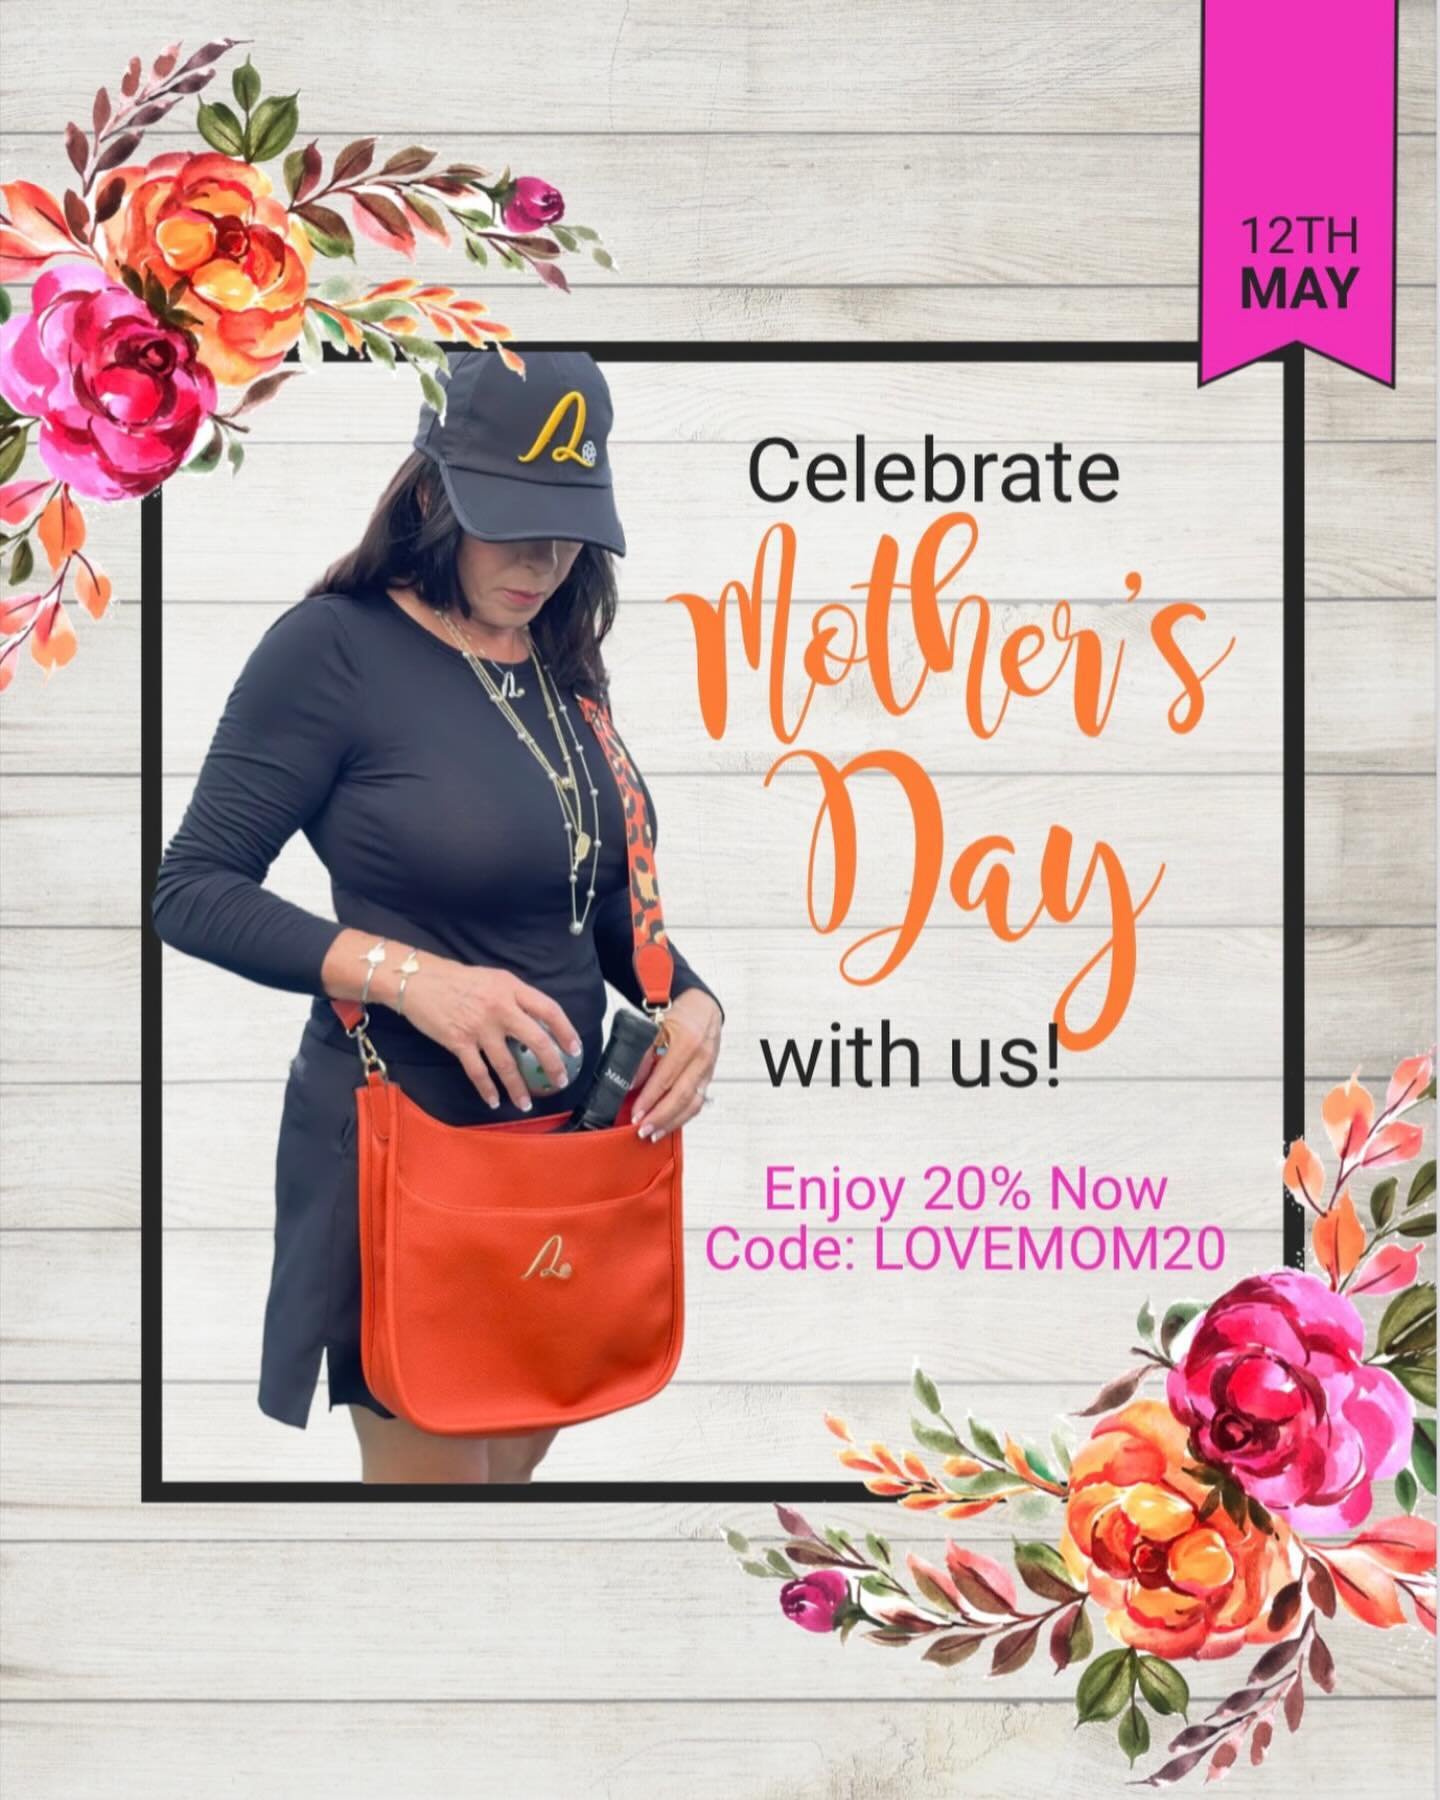 Sure, here&rsquo;s a Mother&rsquo;s Day post based on the previous chat:

🌺Celebrate Mom&rsquo;s Love for Pickleball this Mother&rsquo;s Day! 🌺

Looking for the perfect gift for your Pickleball-loving mom? 🏓Look no further! Treat her to the luxury